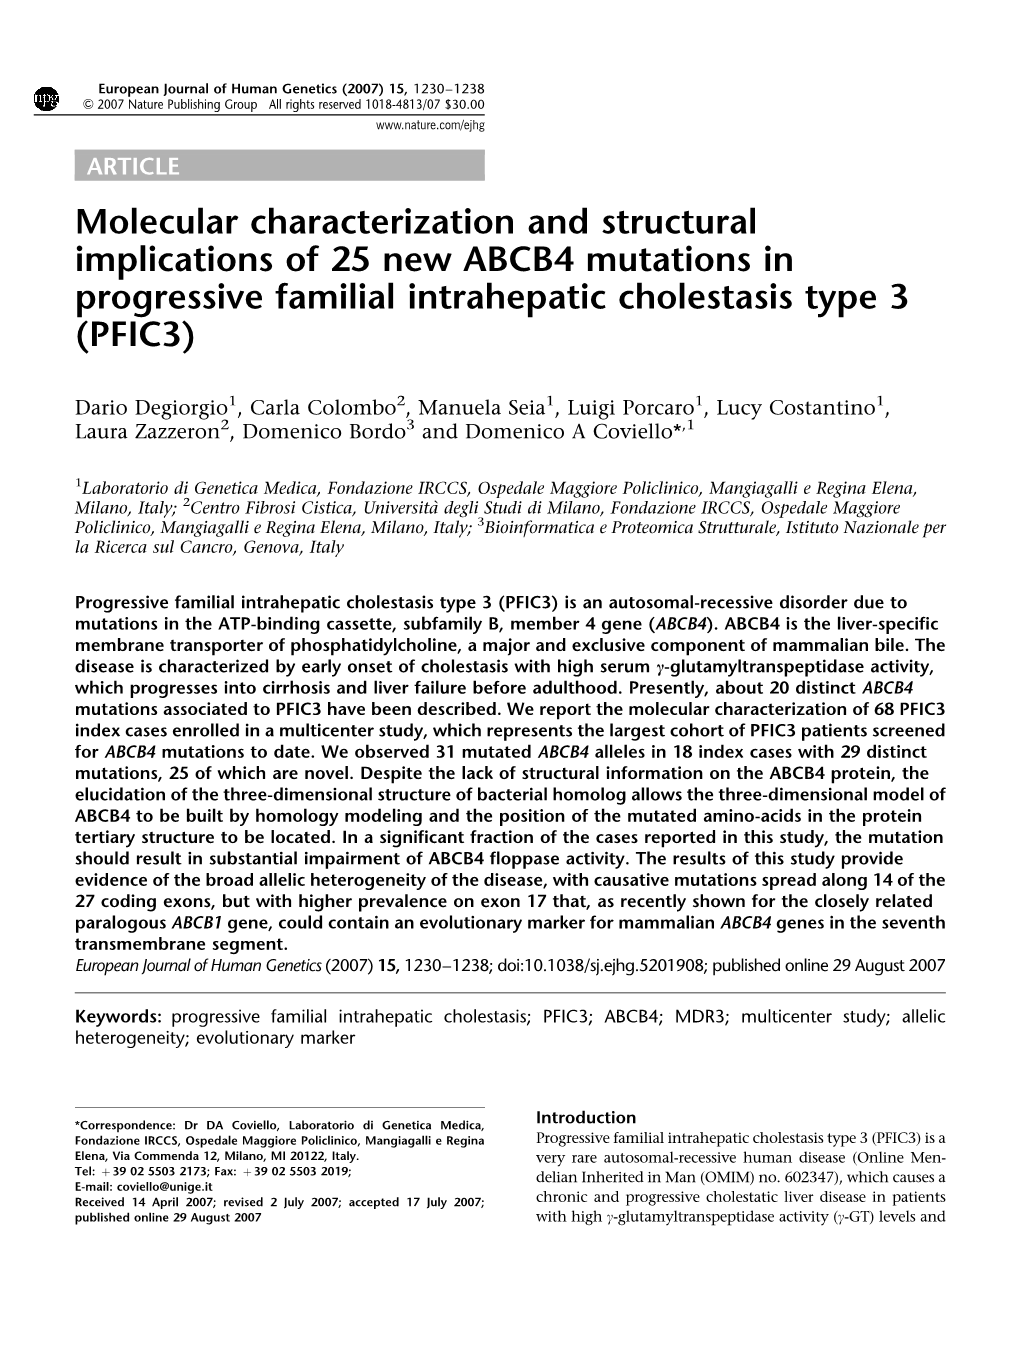 Molecular Characterization and Structural Implications of 25 New ABCB4 Mutations in Progressive Familial Intrahepatic Cholestasis Type 3 (PFIC3)